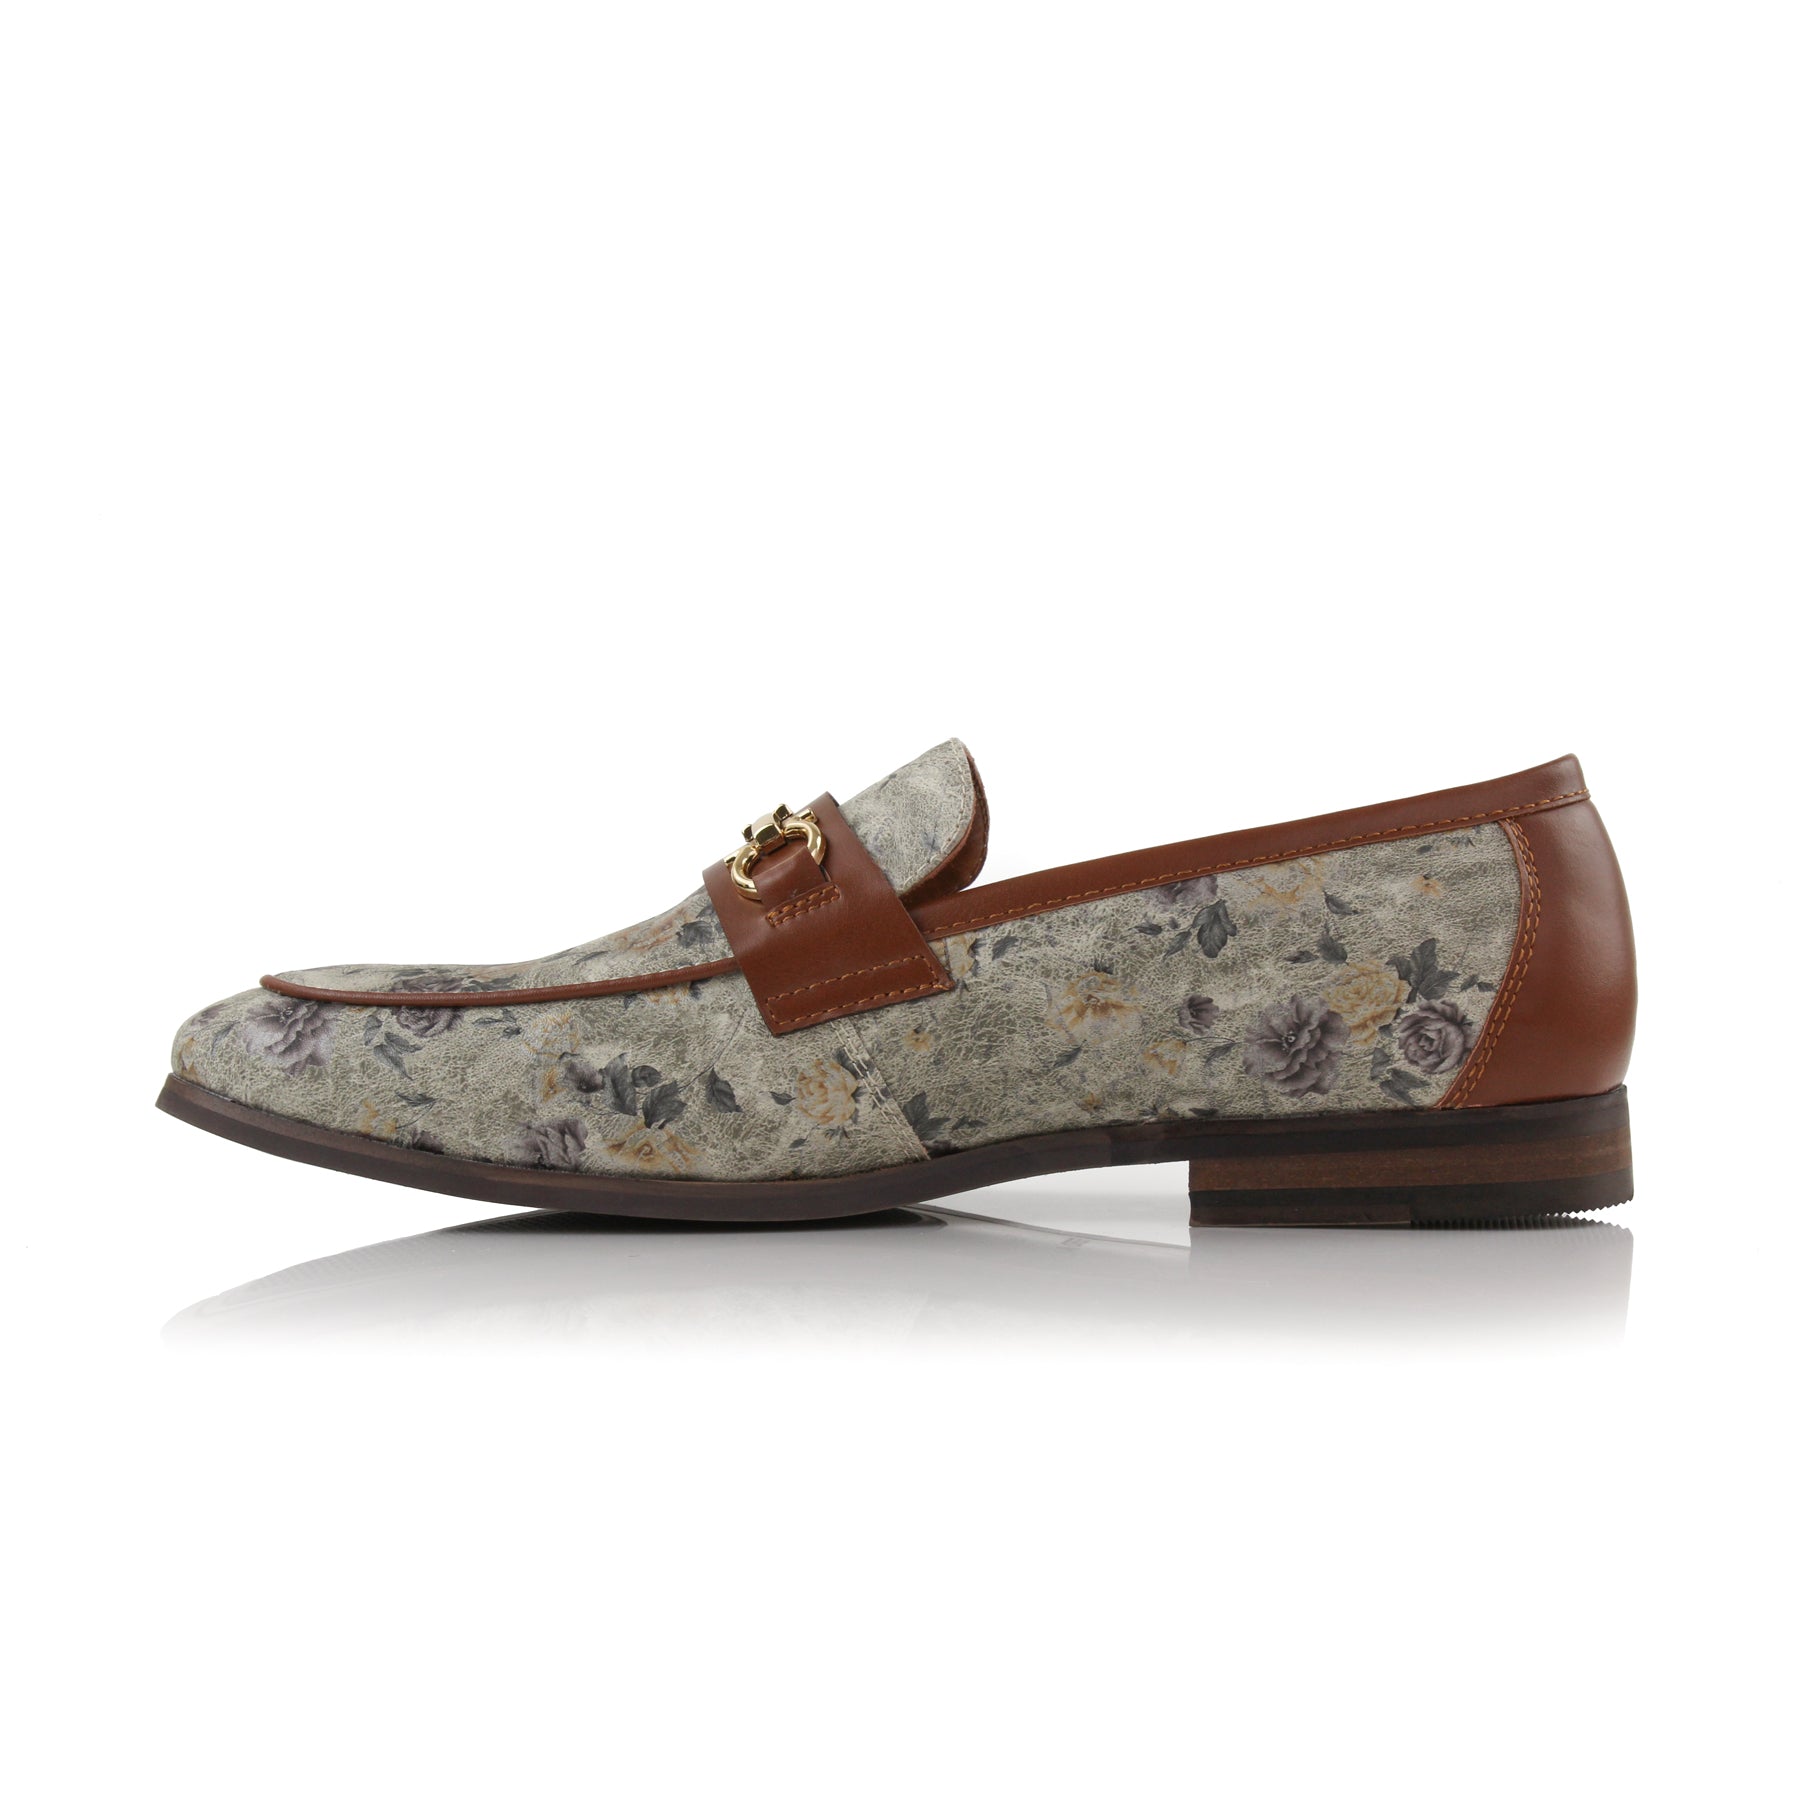 Floral Vegan Loafers | Darrell by Ferro Aldo | Conal Footwear | Inner Side Angle View